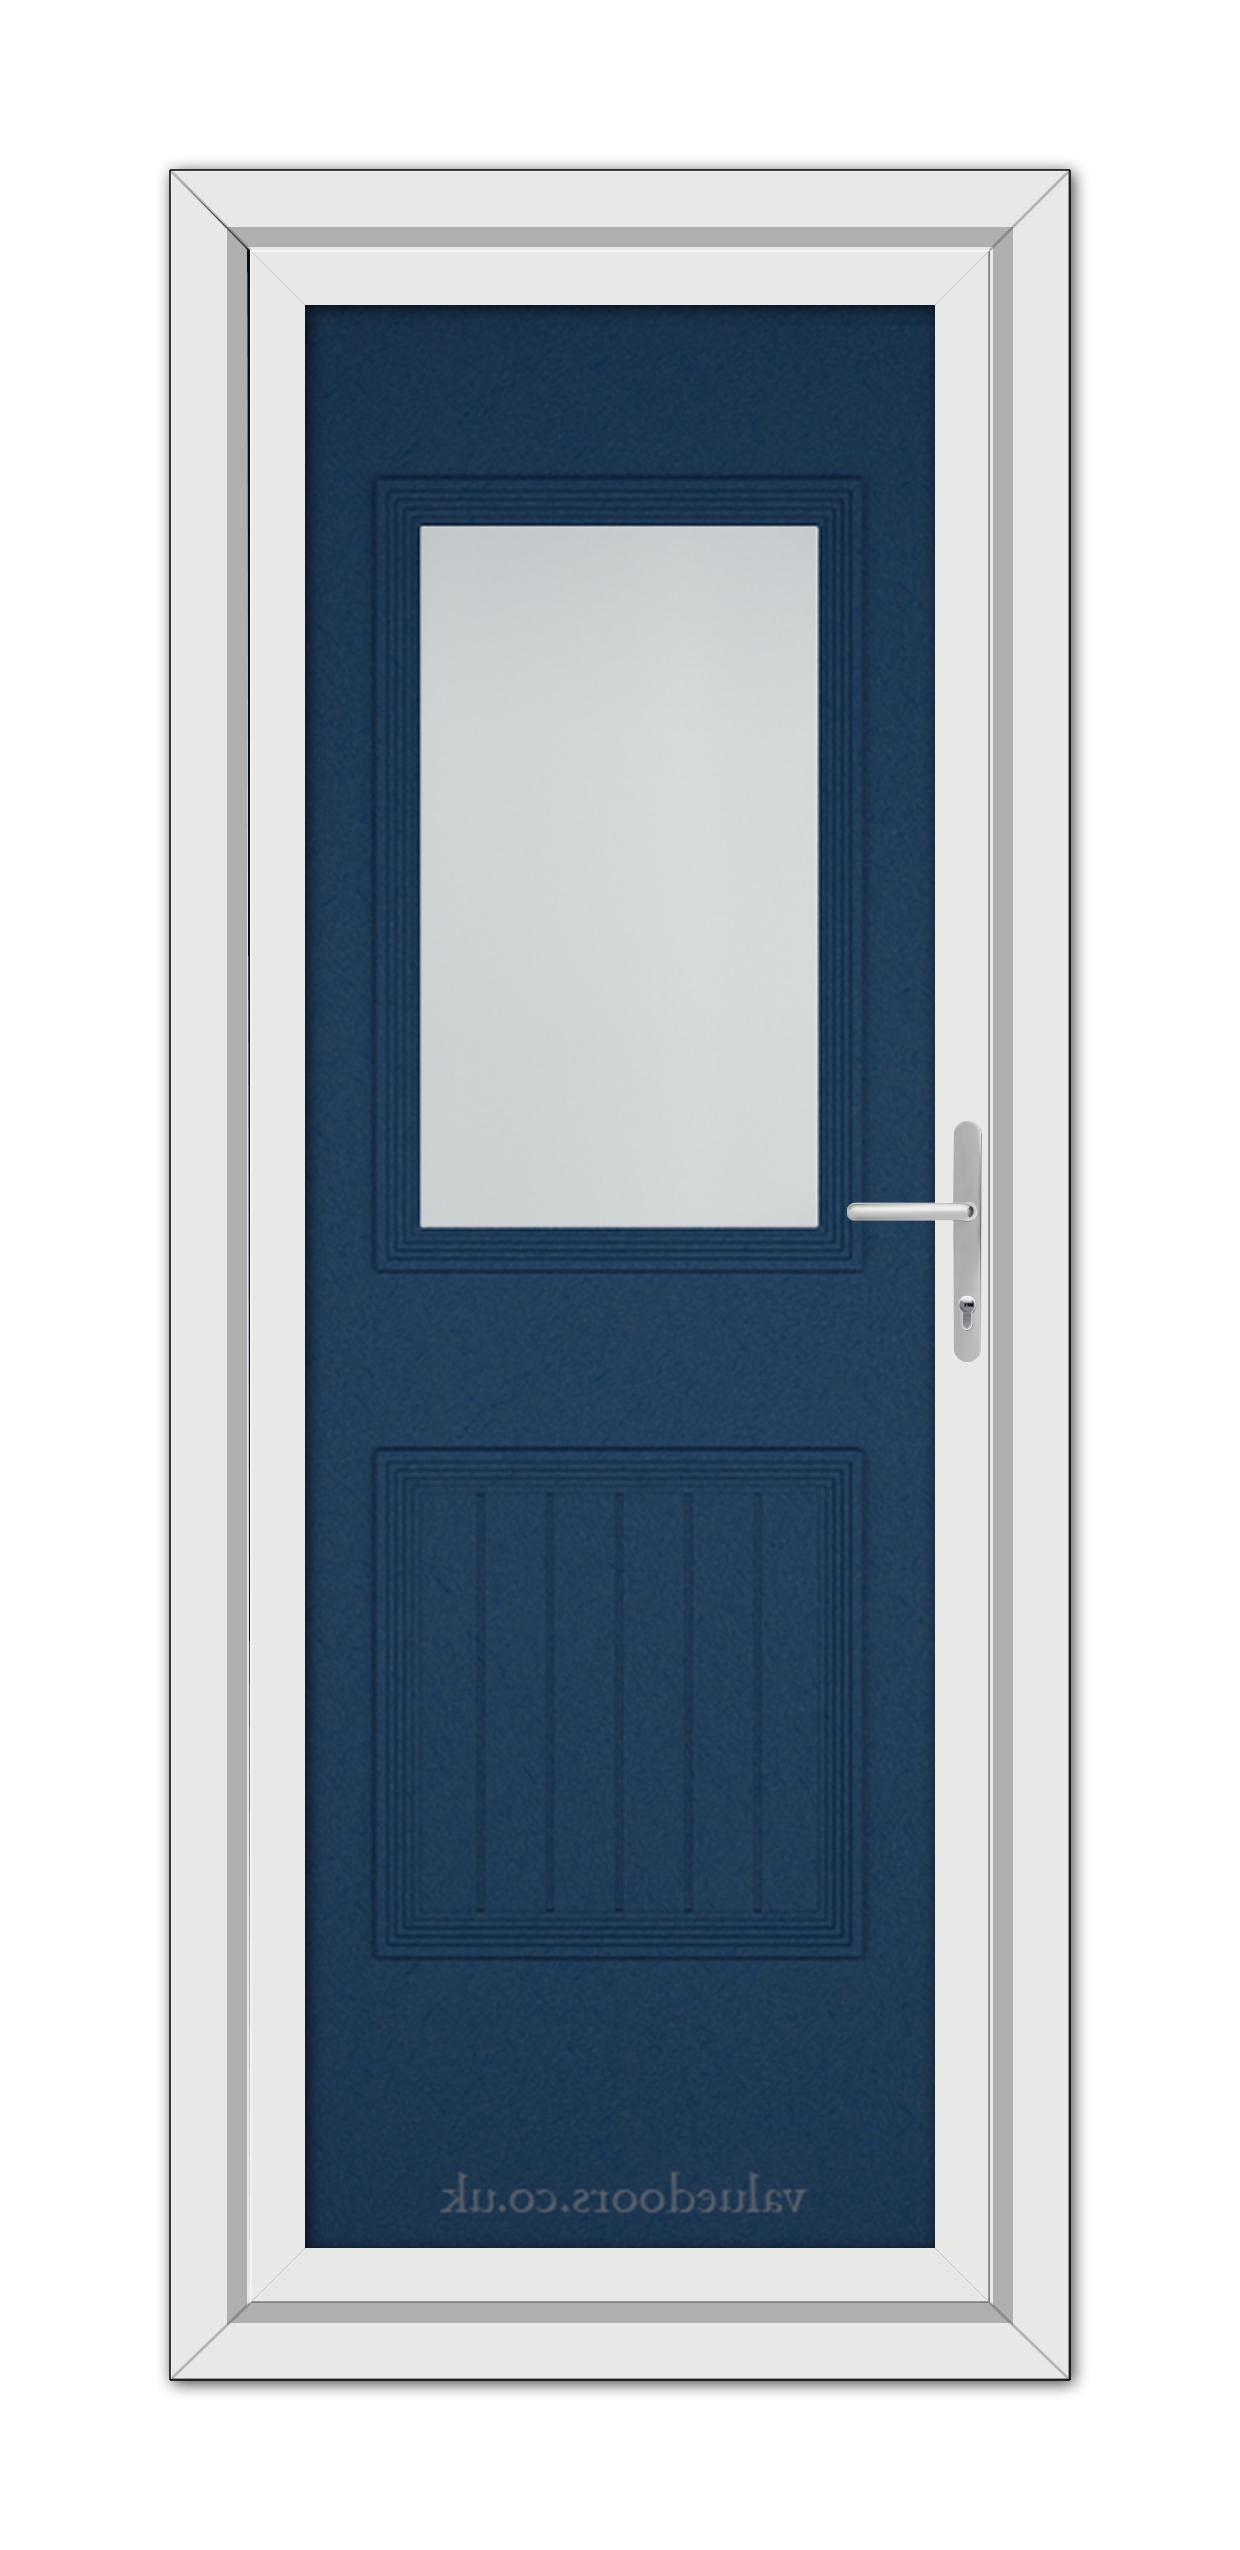 A modern Blue Alnwick One uPVC door with a vertical rectangular window, white frame, and a silver handle, set in a white door frame.